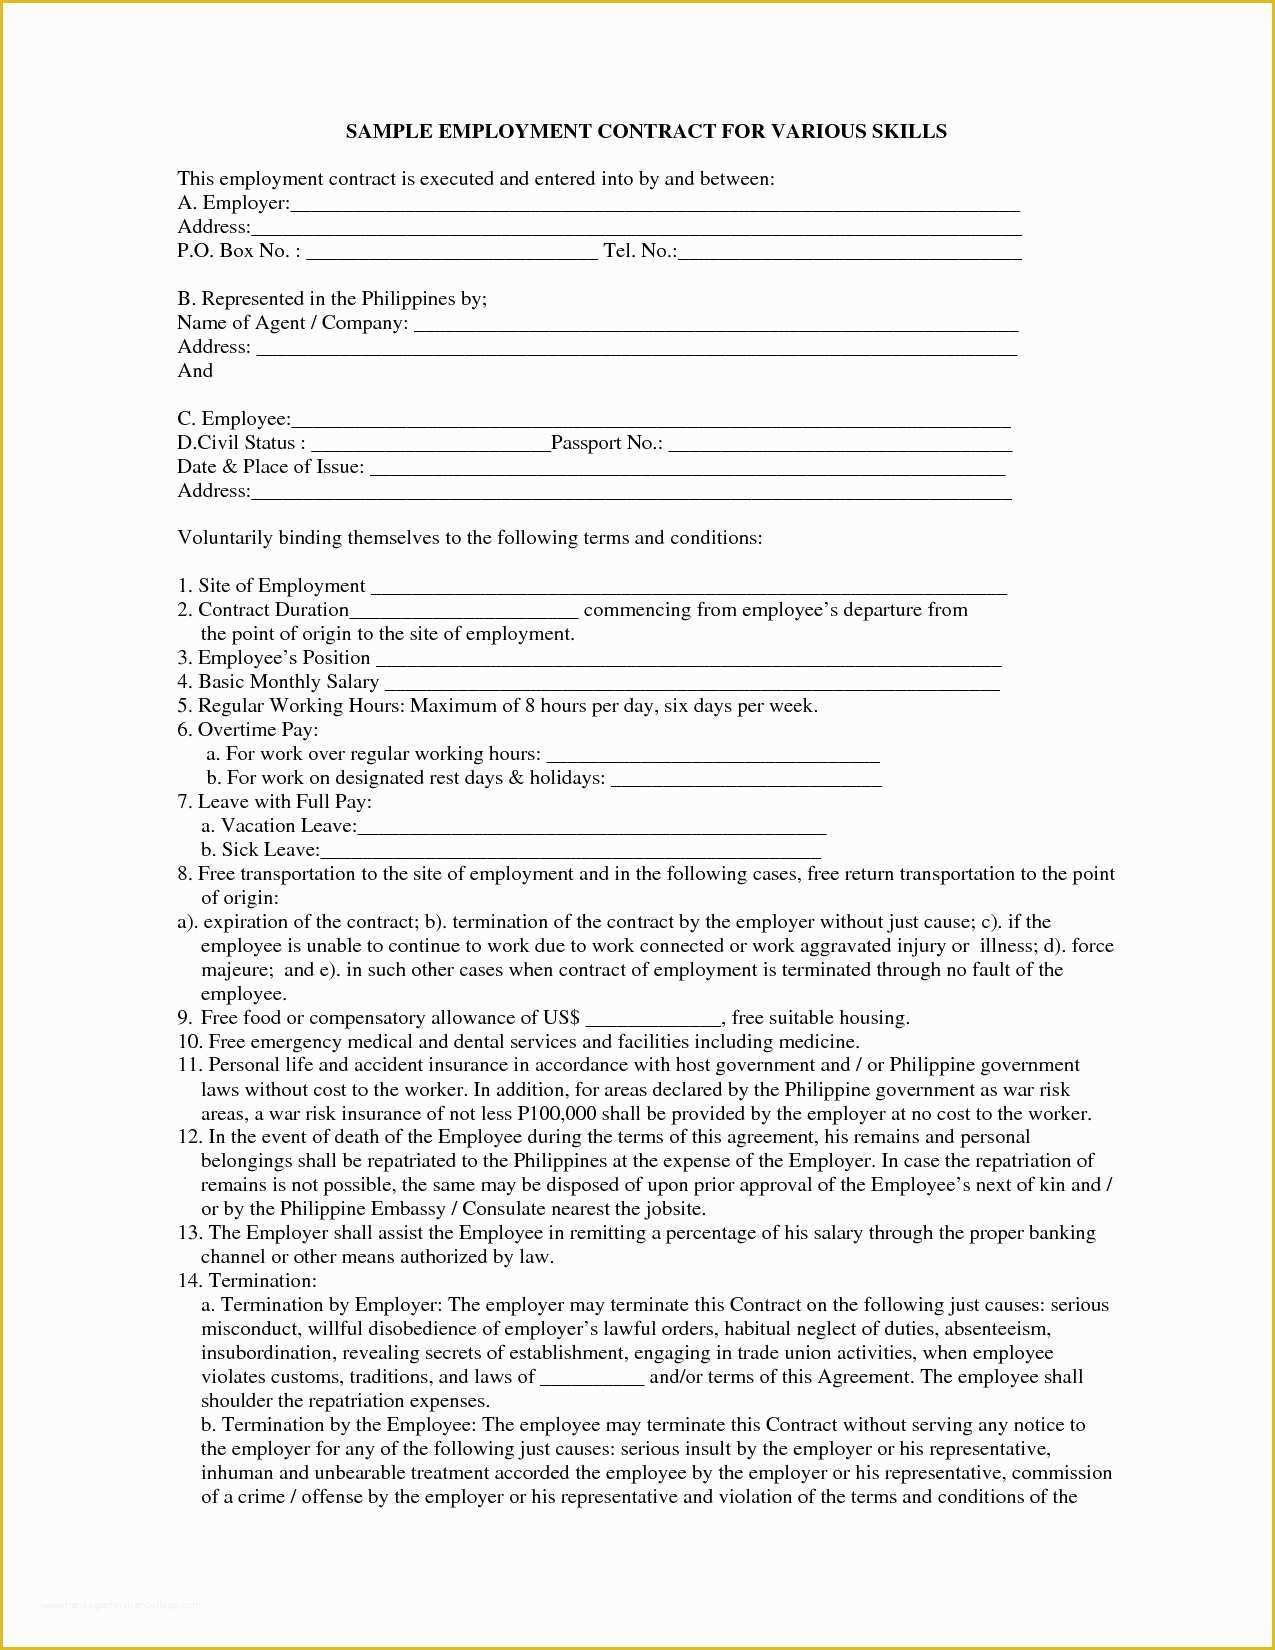 Employment Contract Template Free Of Construction Employment Contract Sample Philippines